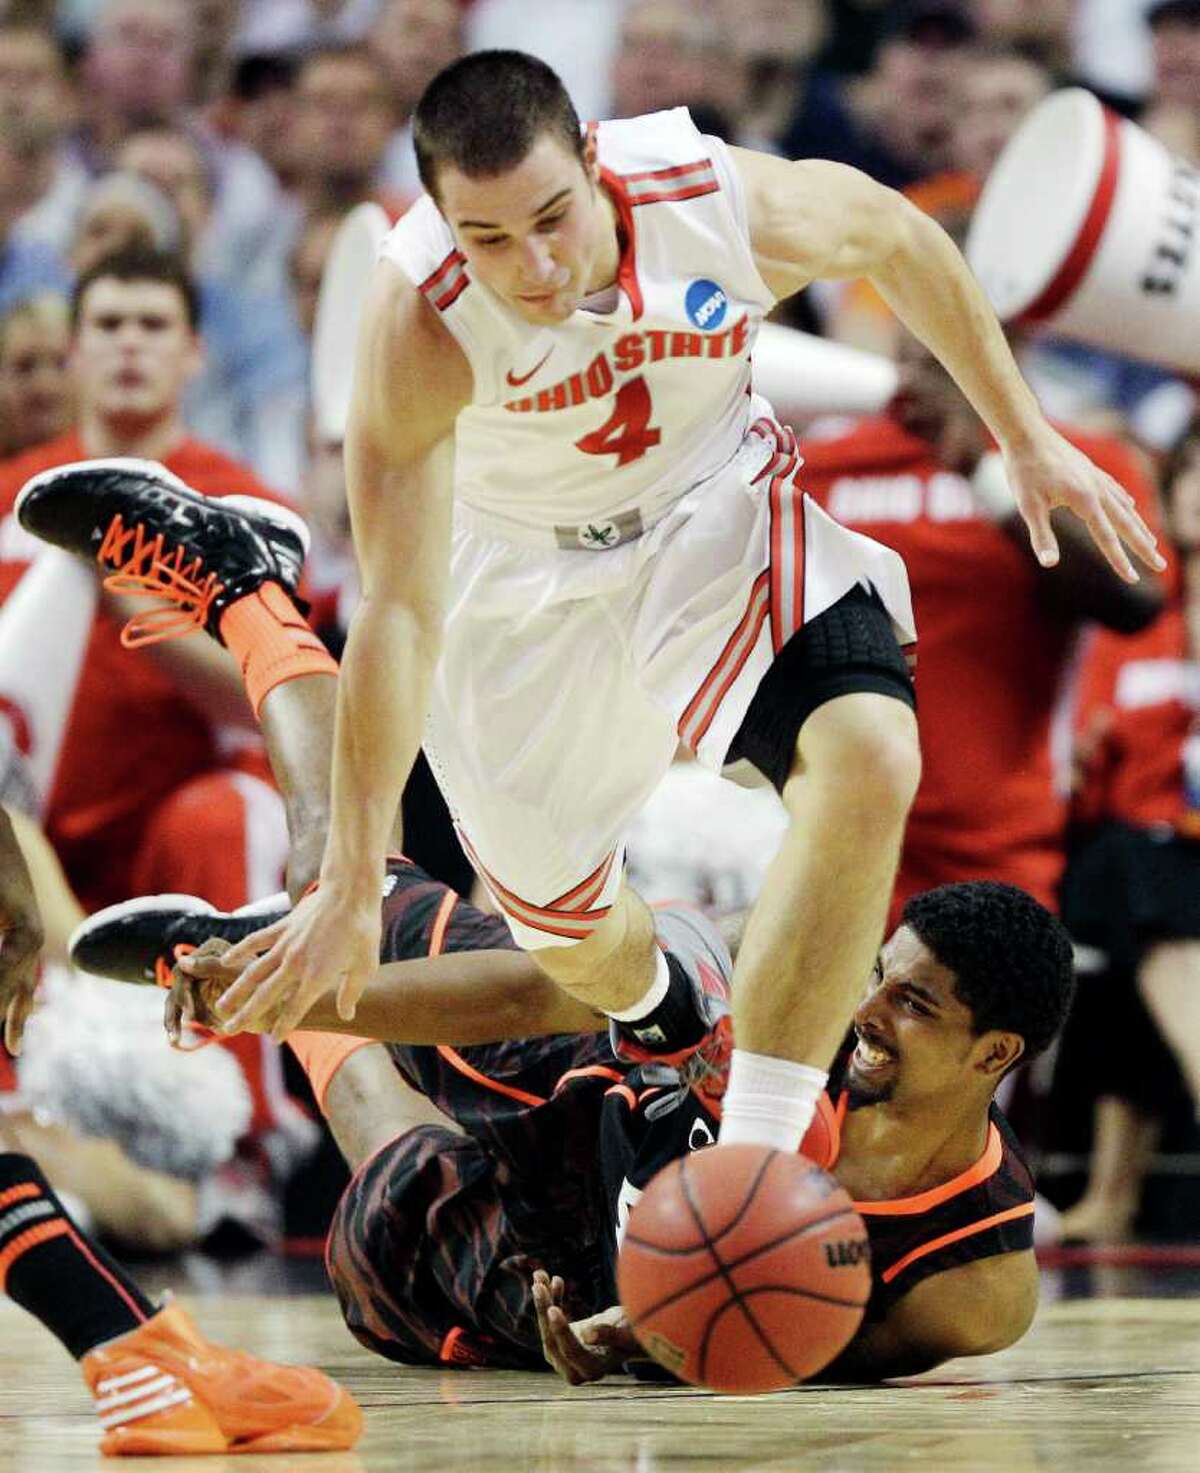 Ohio State guard Aaron Craft sparked a second-half run that propelled the Buckeyes to victory.